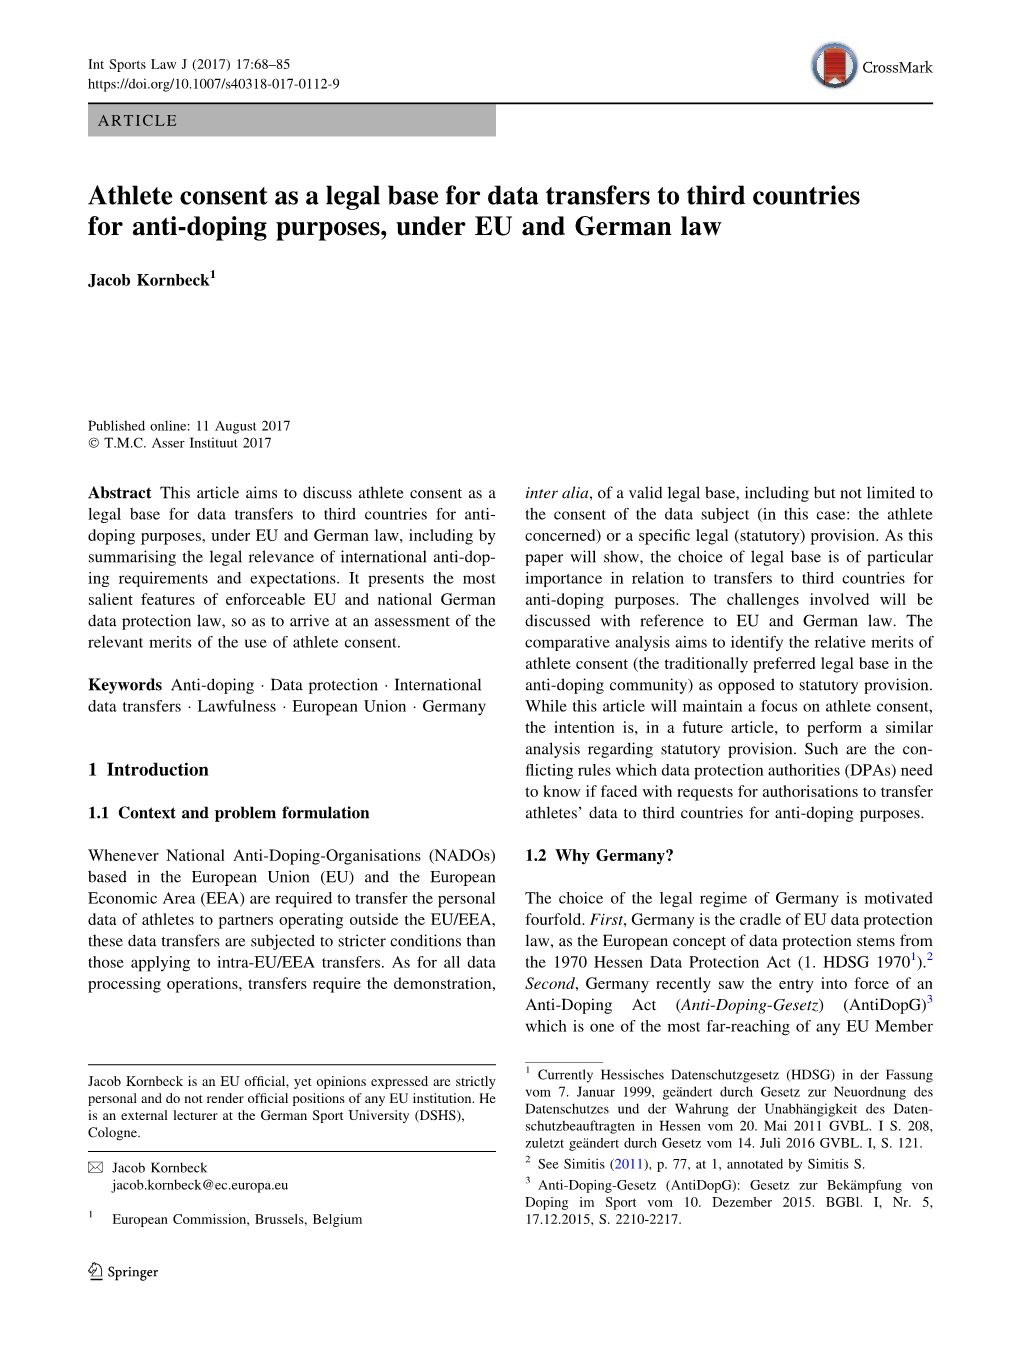 Athlete Consent As a Legal Base for Data Transfers to Third Countries for Anti-Doping Purposes, Under EU and German Law